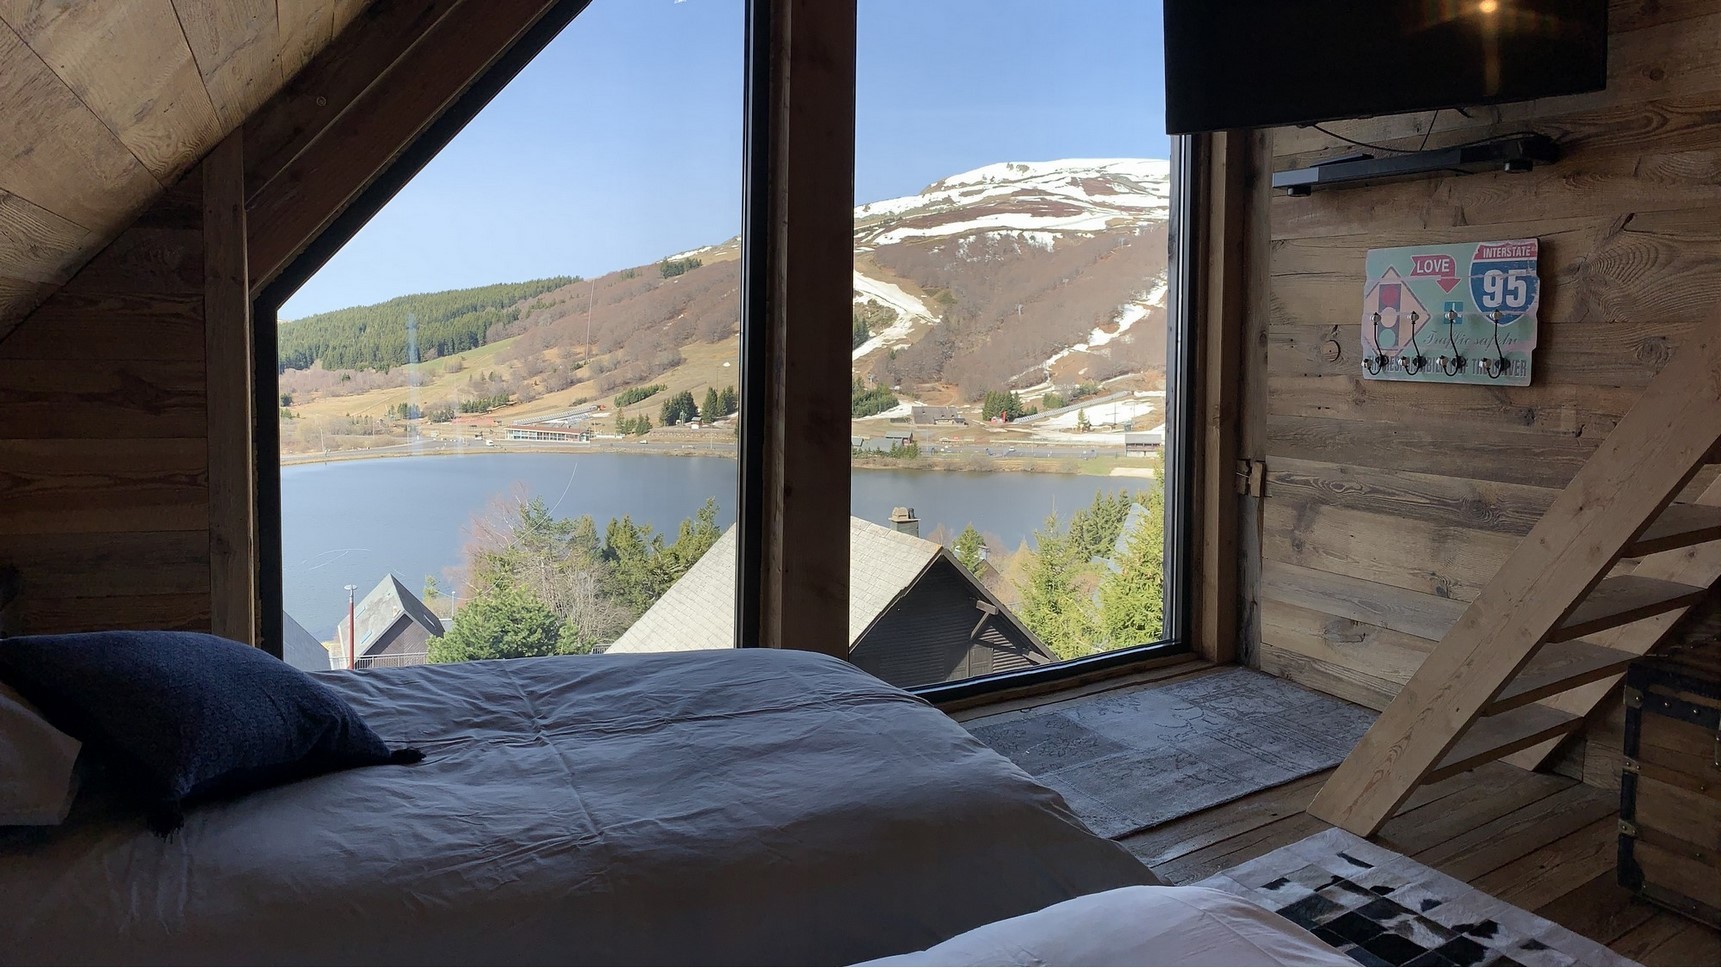 Super Besse chalet, Anorak chalet, Bois Joli room, view of the Hermines lake and the slopes